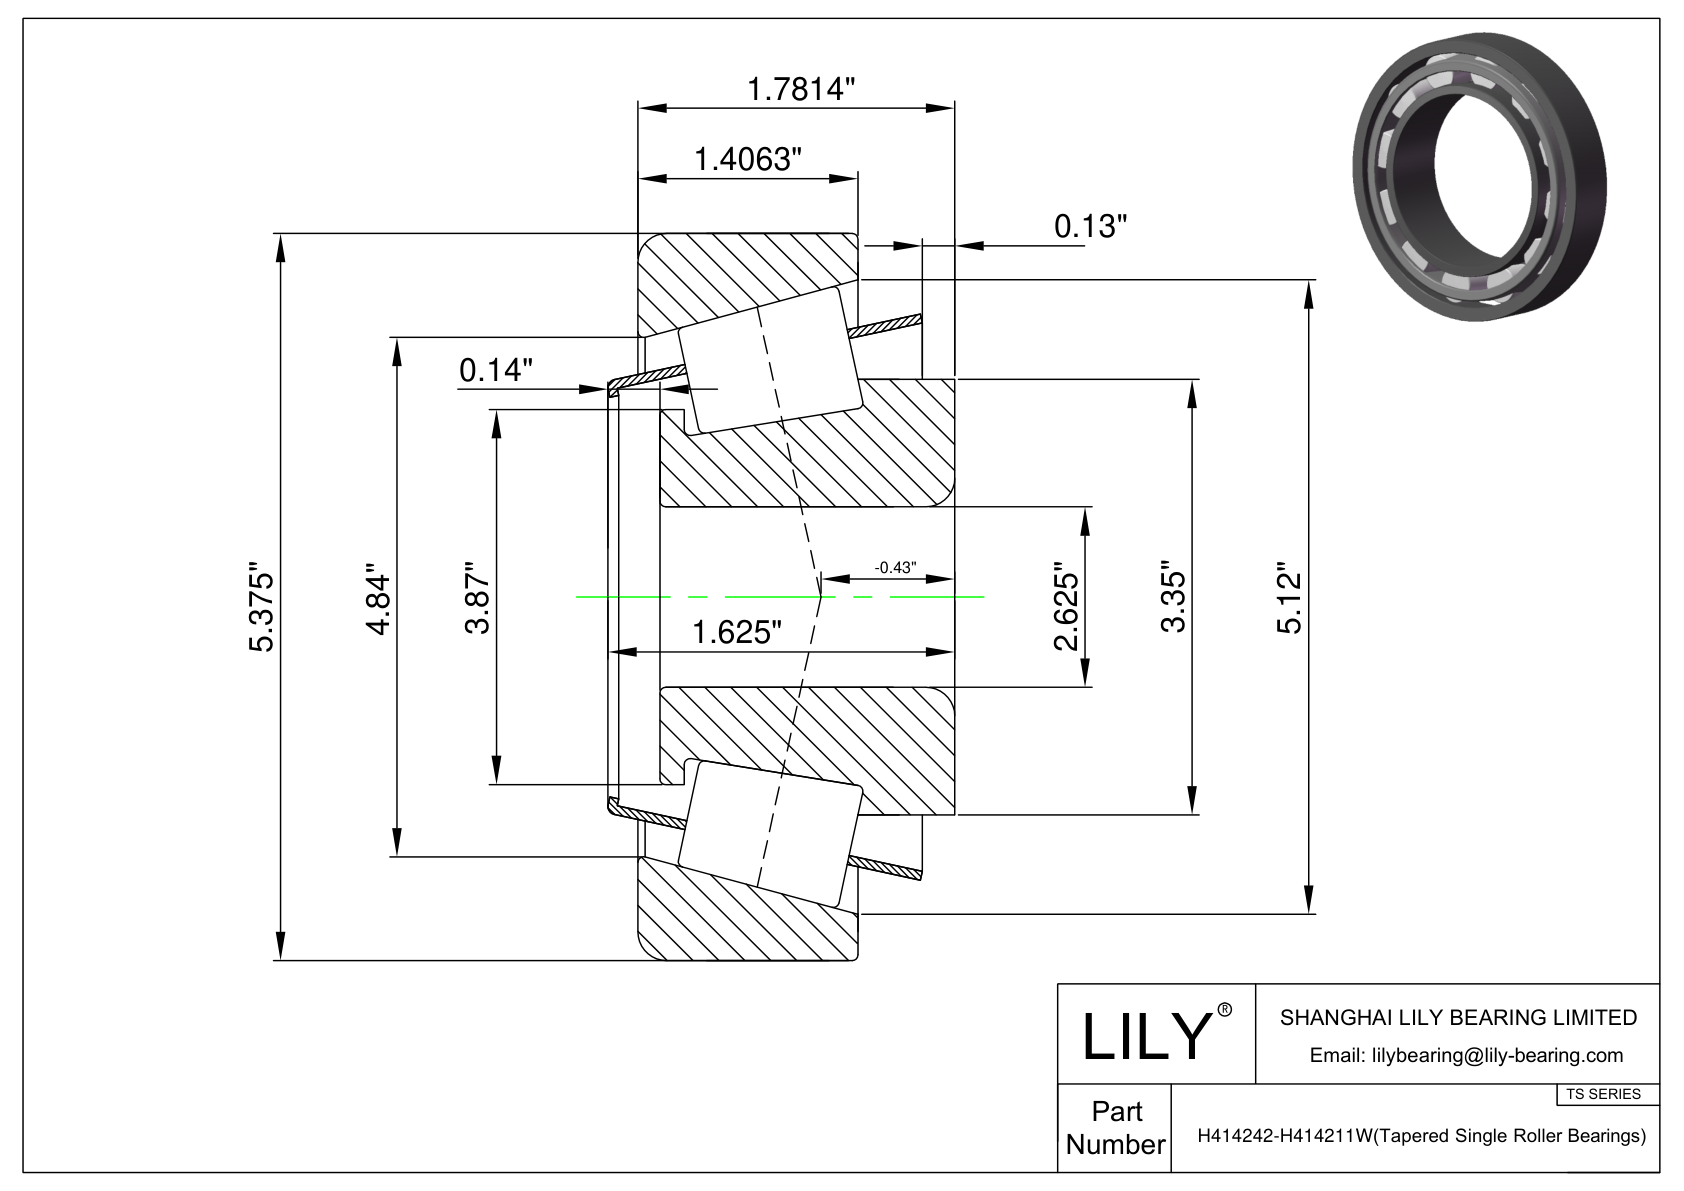 H414242-H414211W TS (Tapered Single Roller Bearings) (Imperial) cad drawing